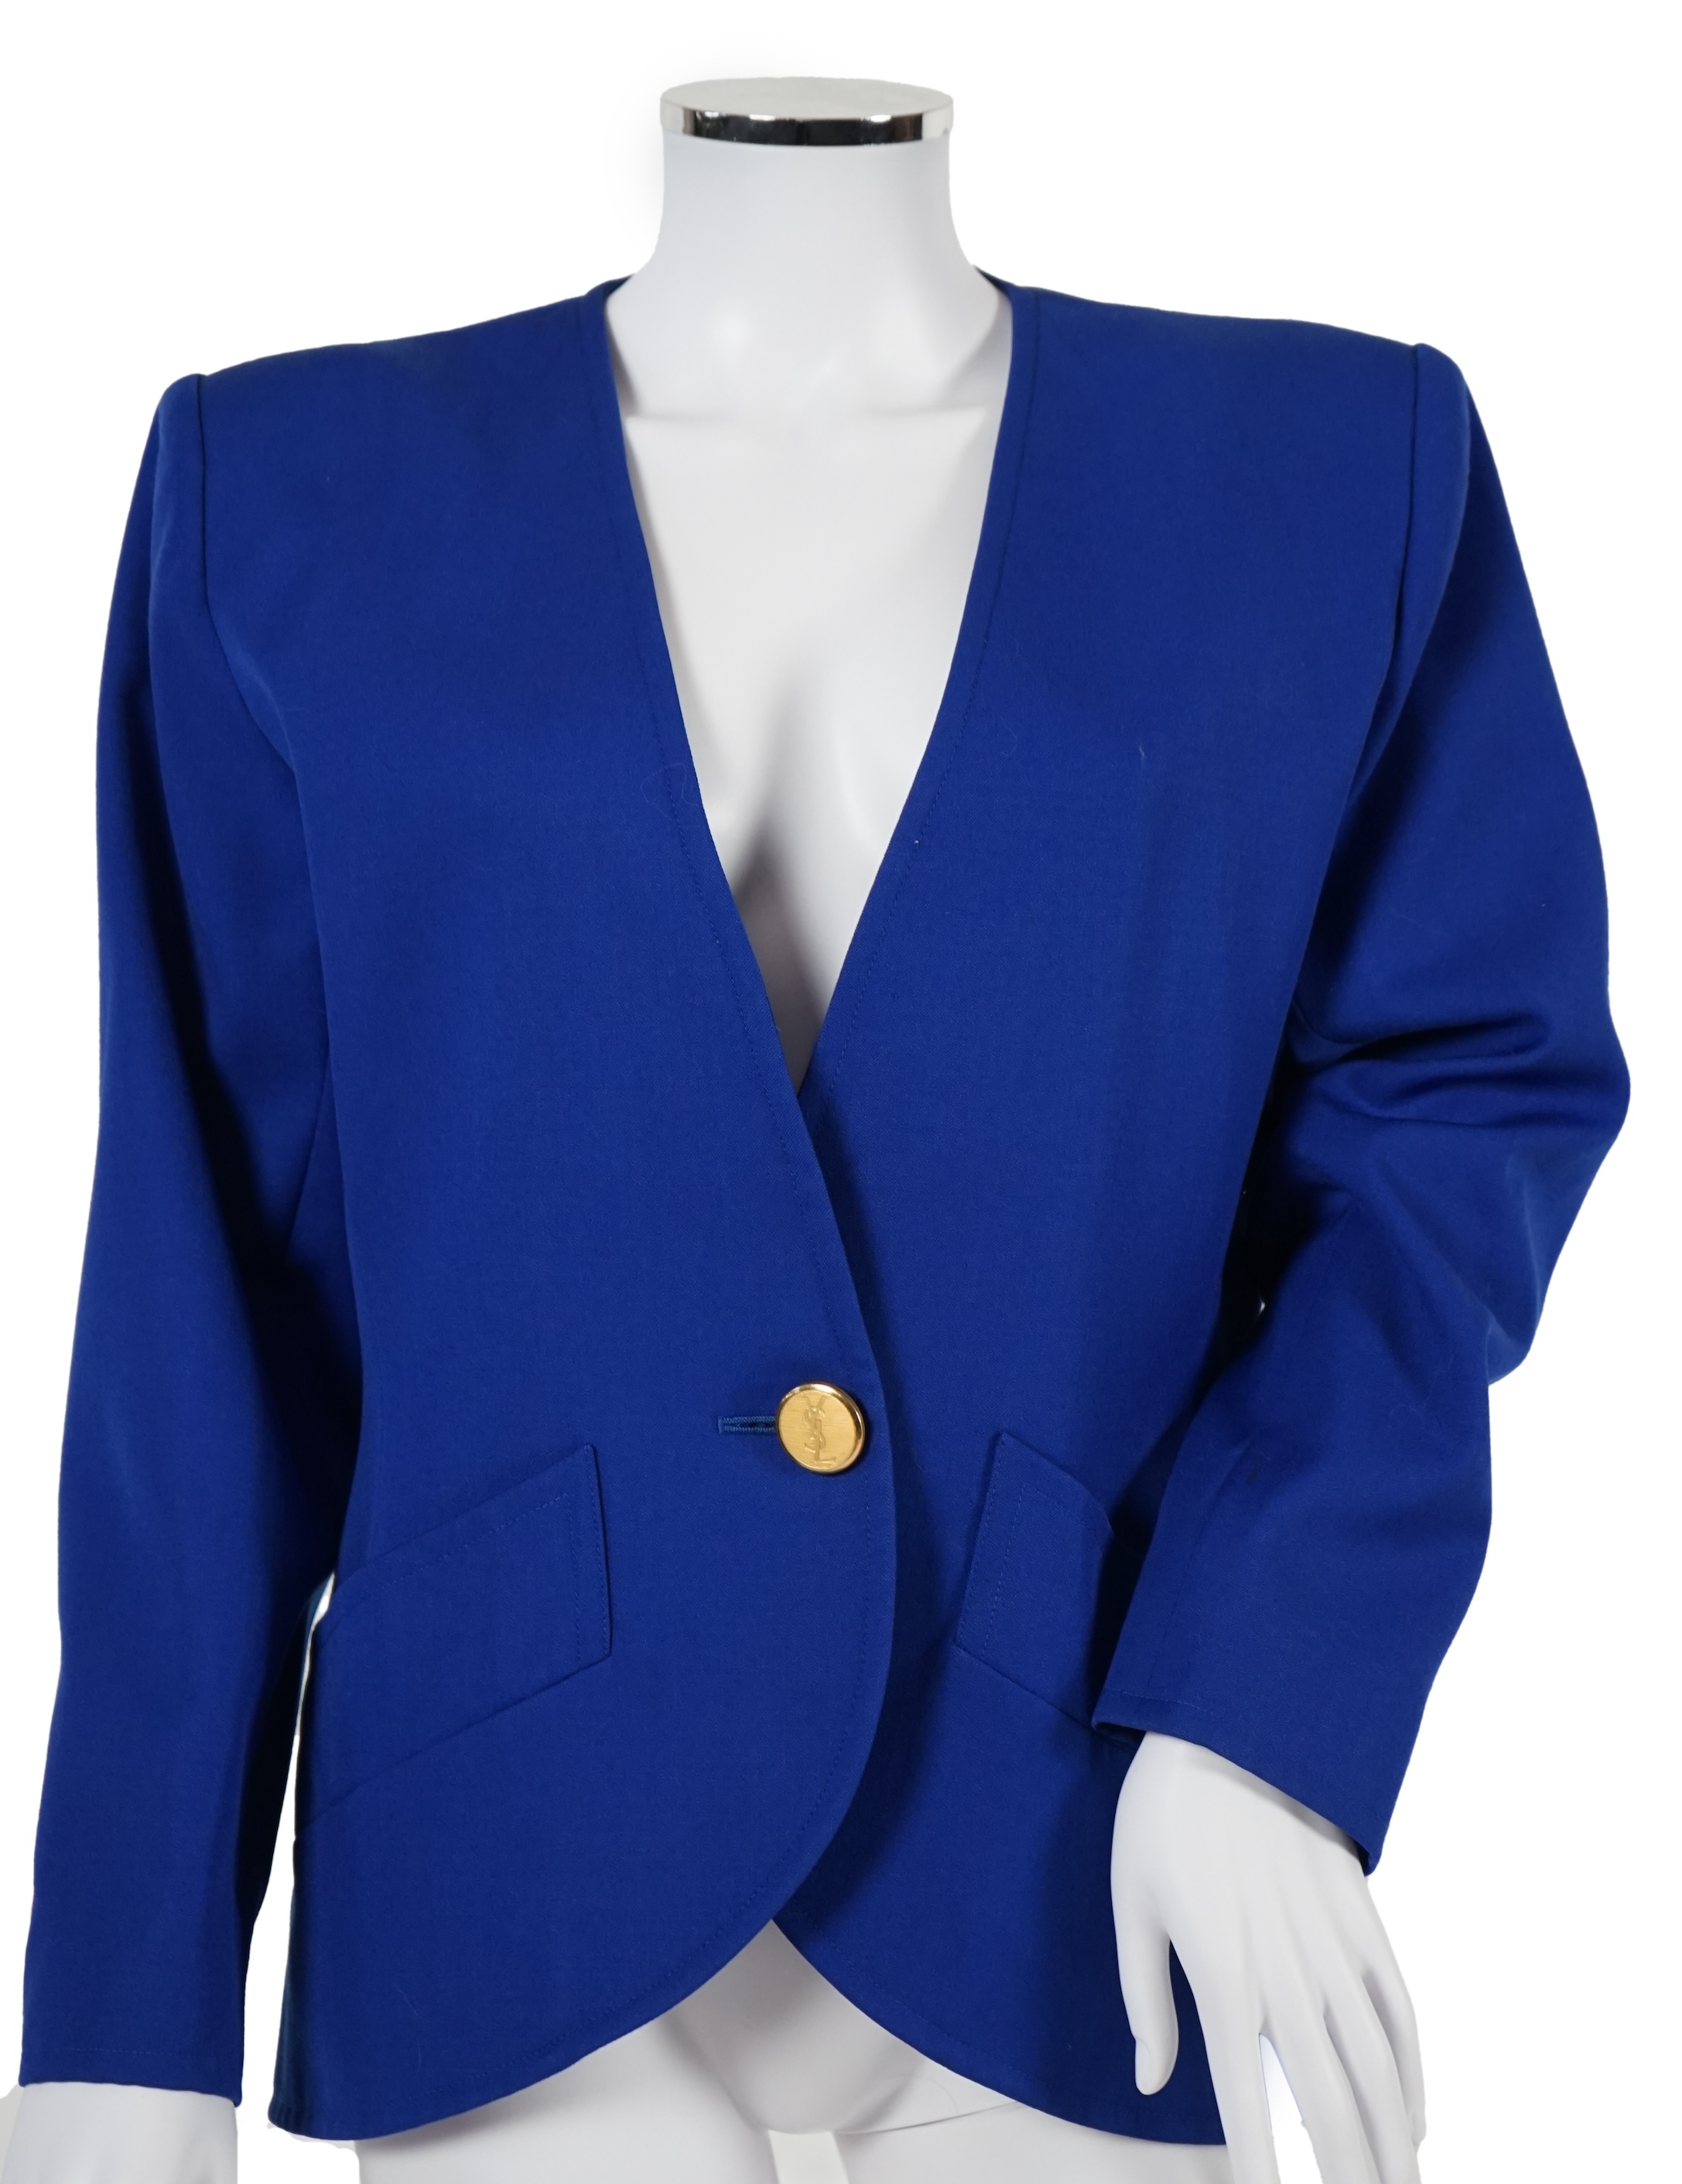 Two vintage Yves Saint Laurent variation lady's skirt suits, royal blue and orange. F 40 (UK 12).Please note alterations to make the waist smaller may have been carried out on some of the skirts. Proceeds to Happy Paws P